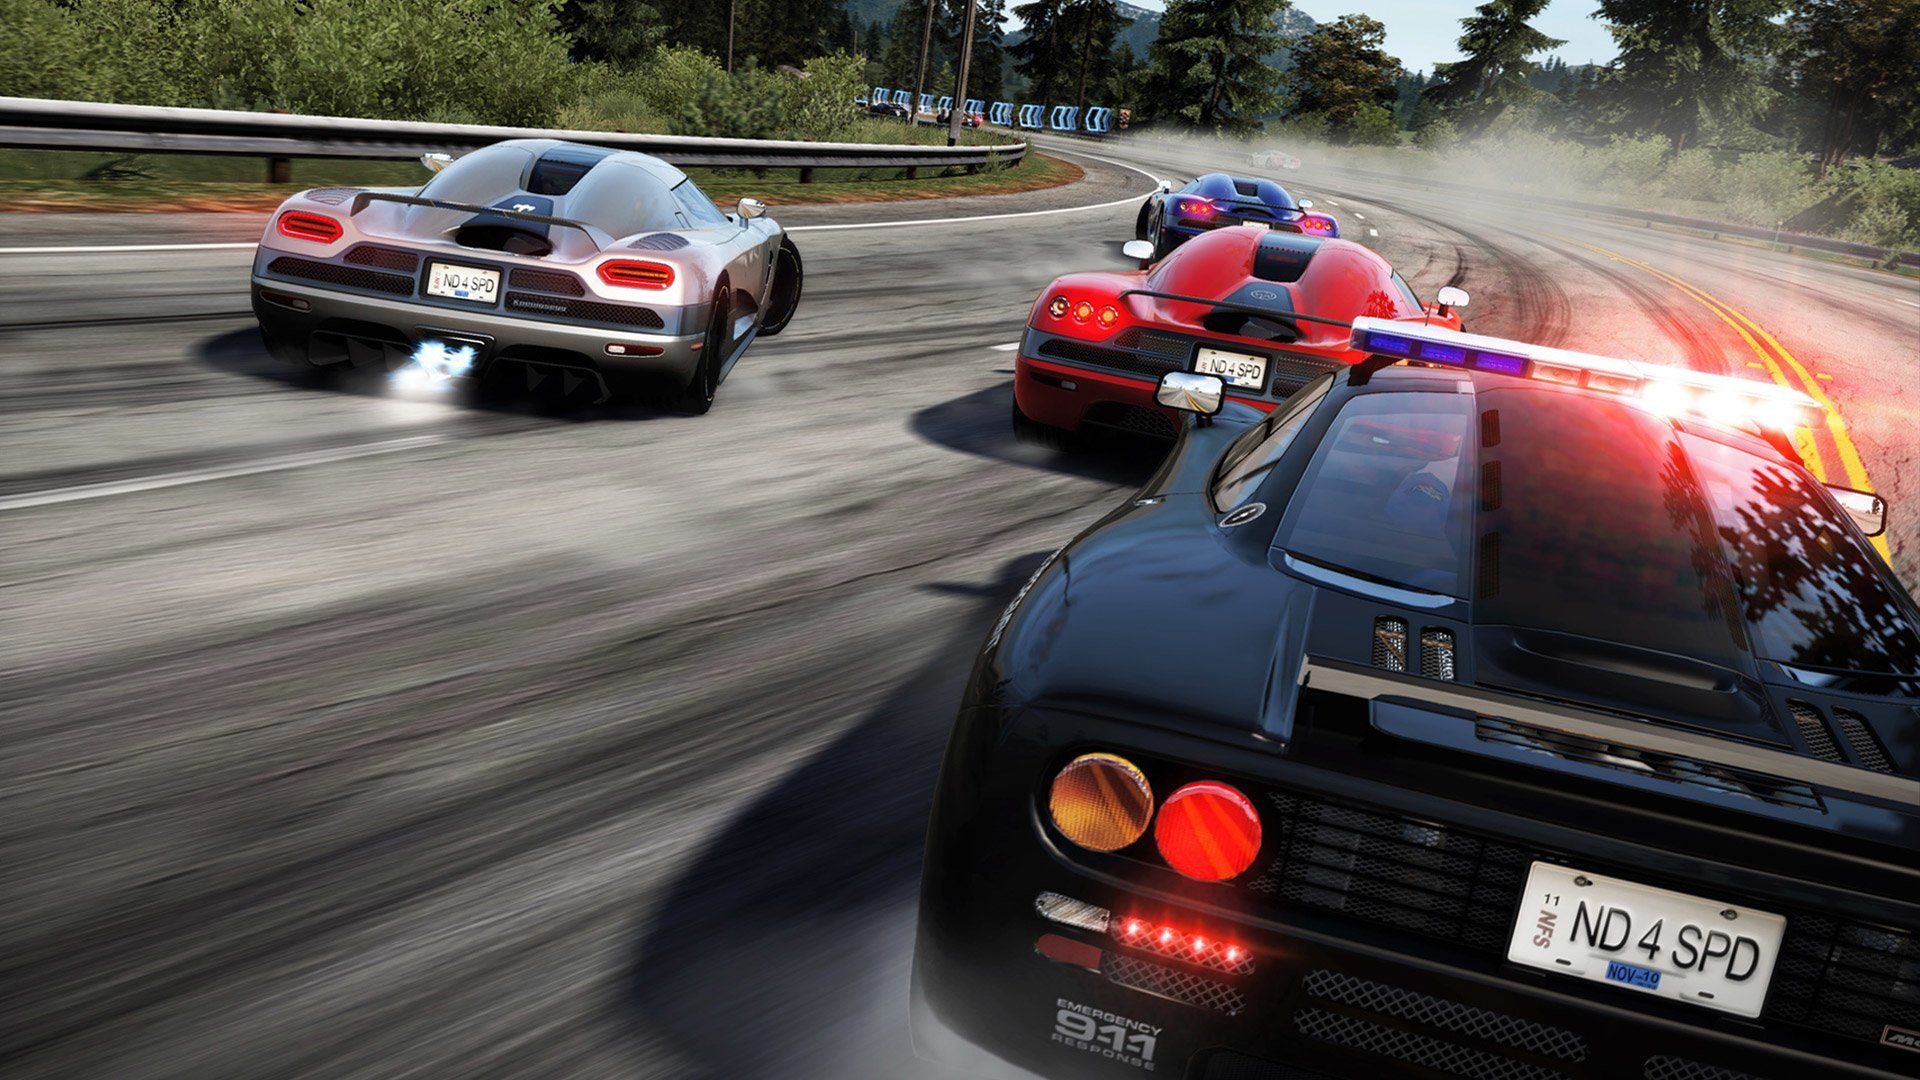 Need For Speed: Hot Pursuit HD Wallpaper. Background Image